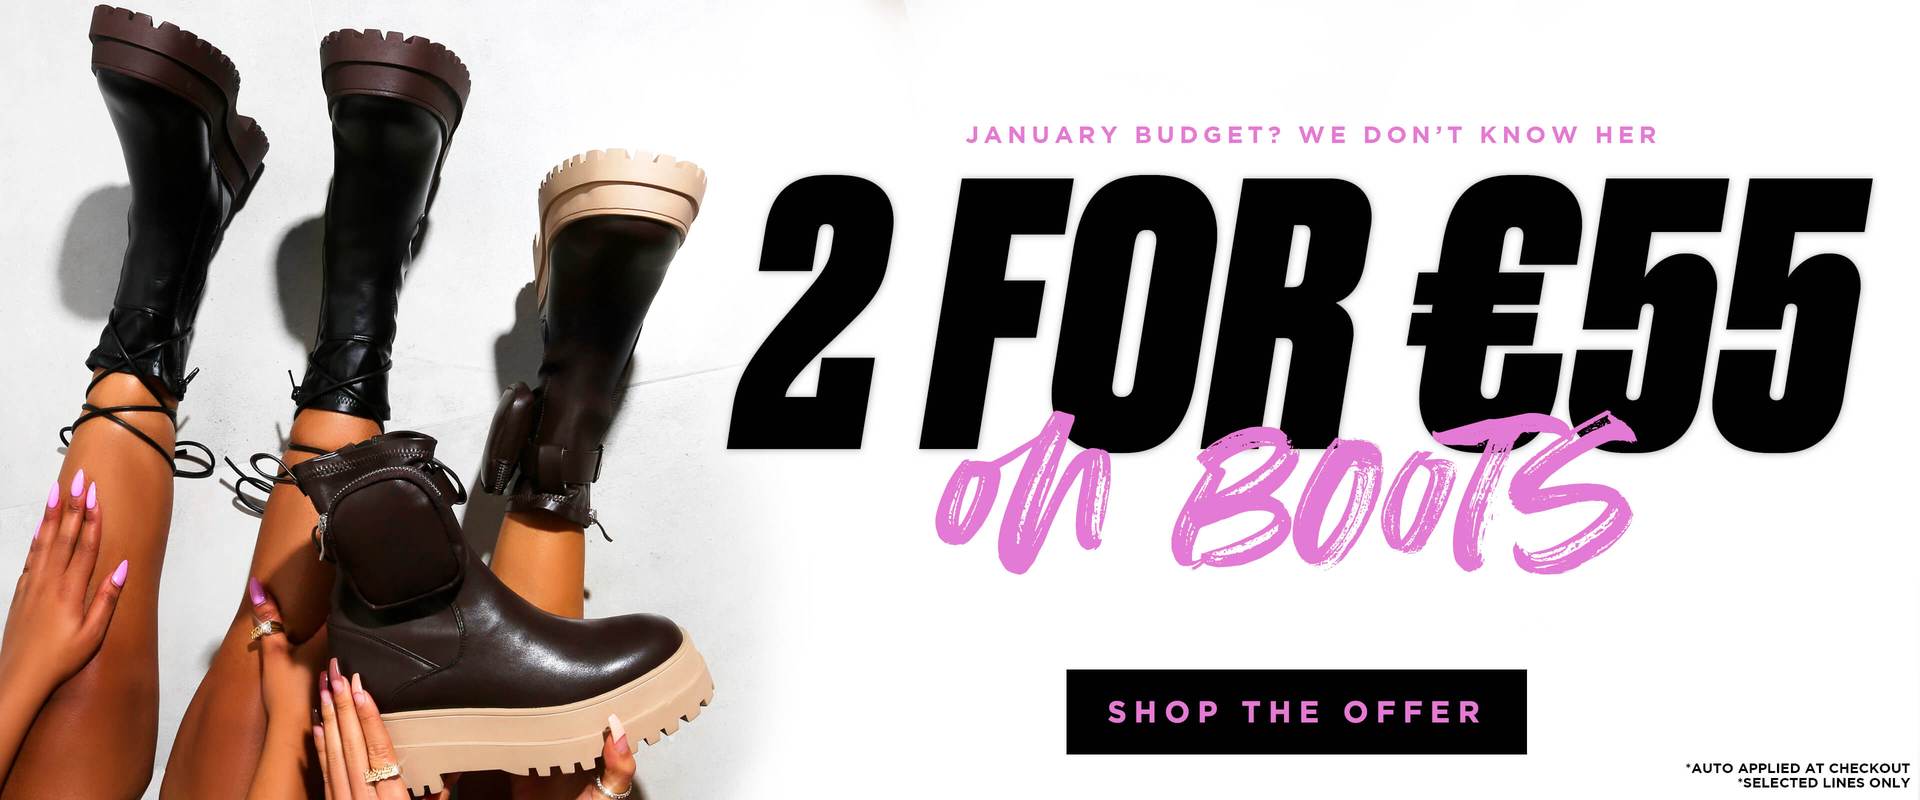 Public Desire: 2 pairs of women's boots for £55